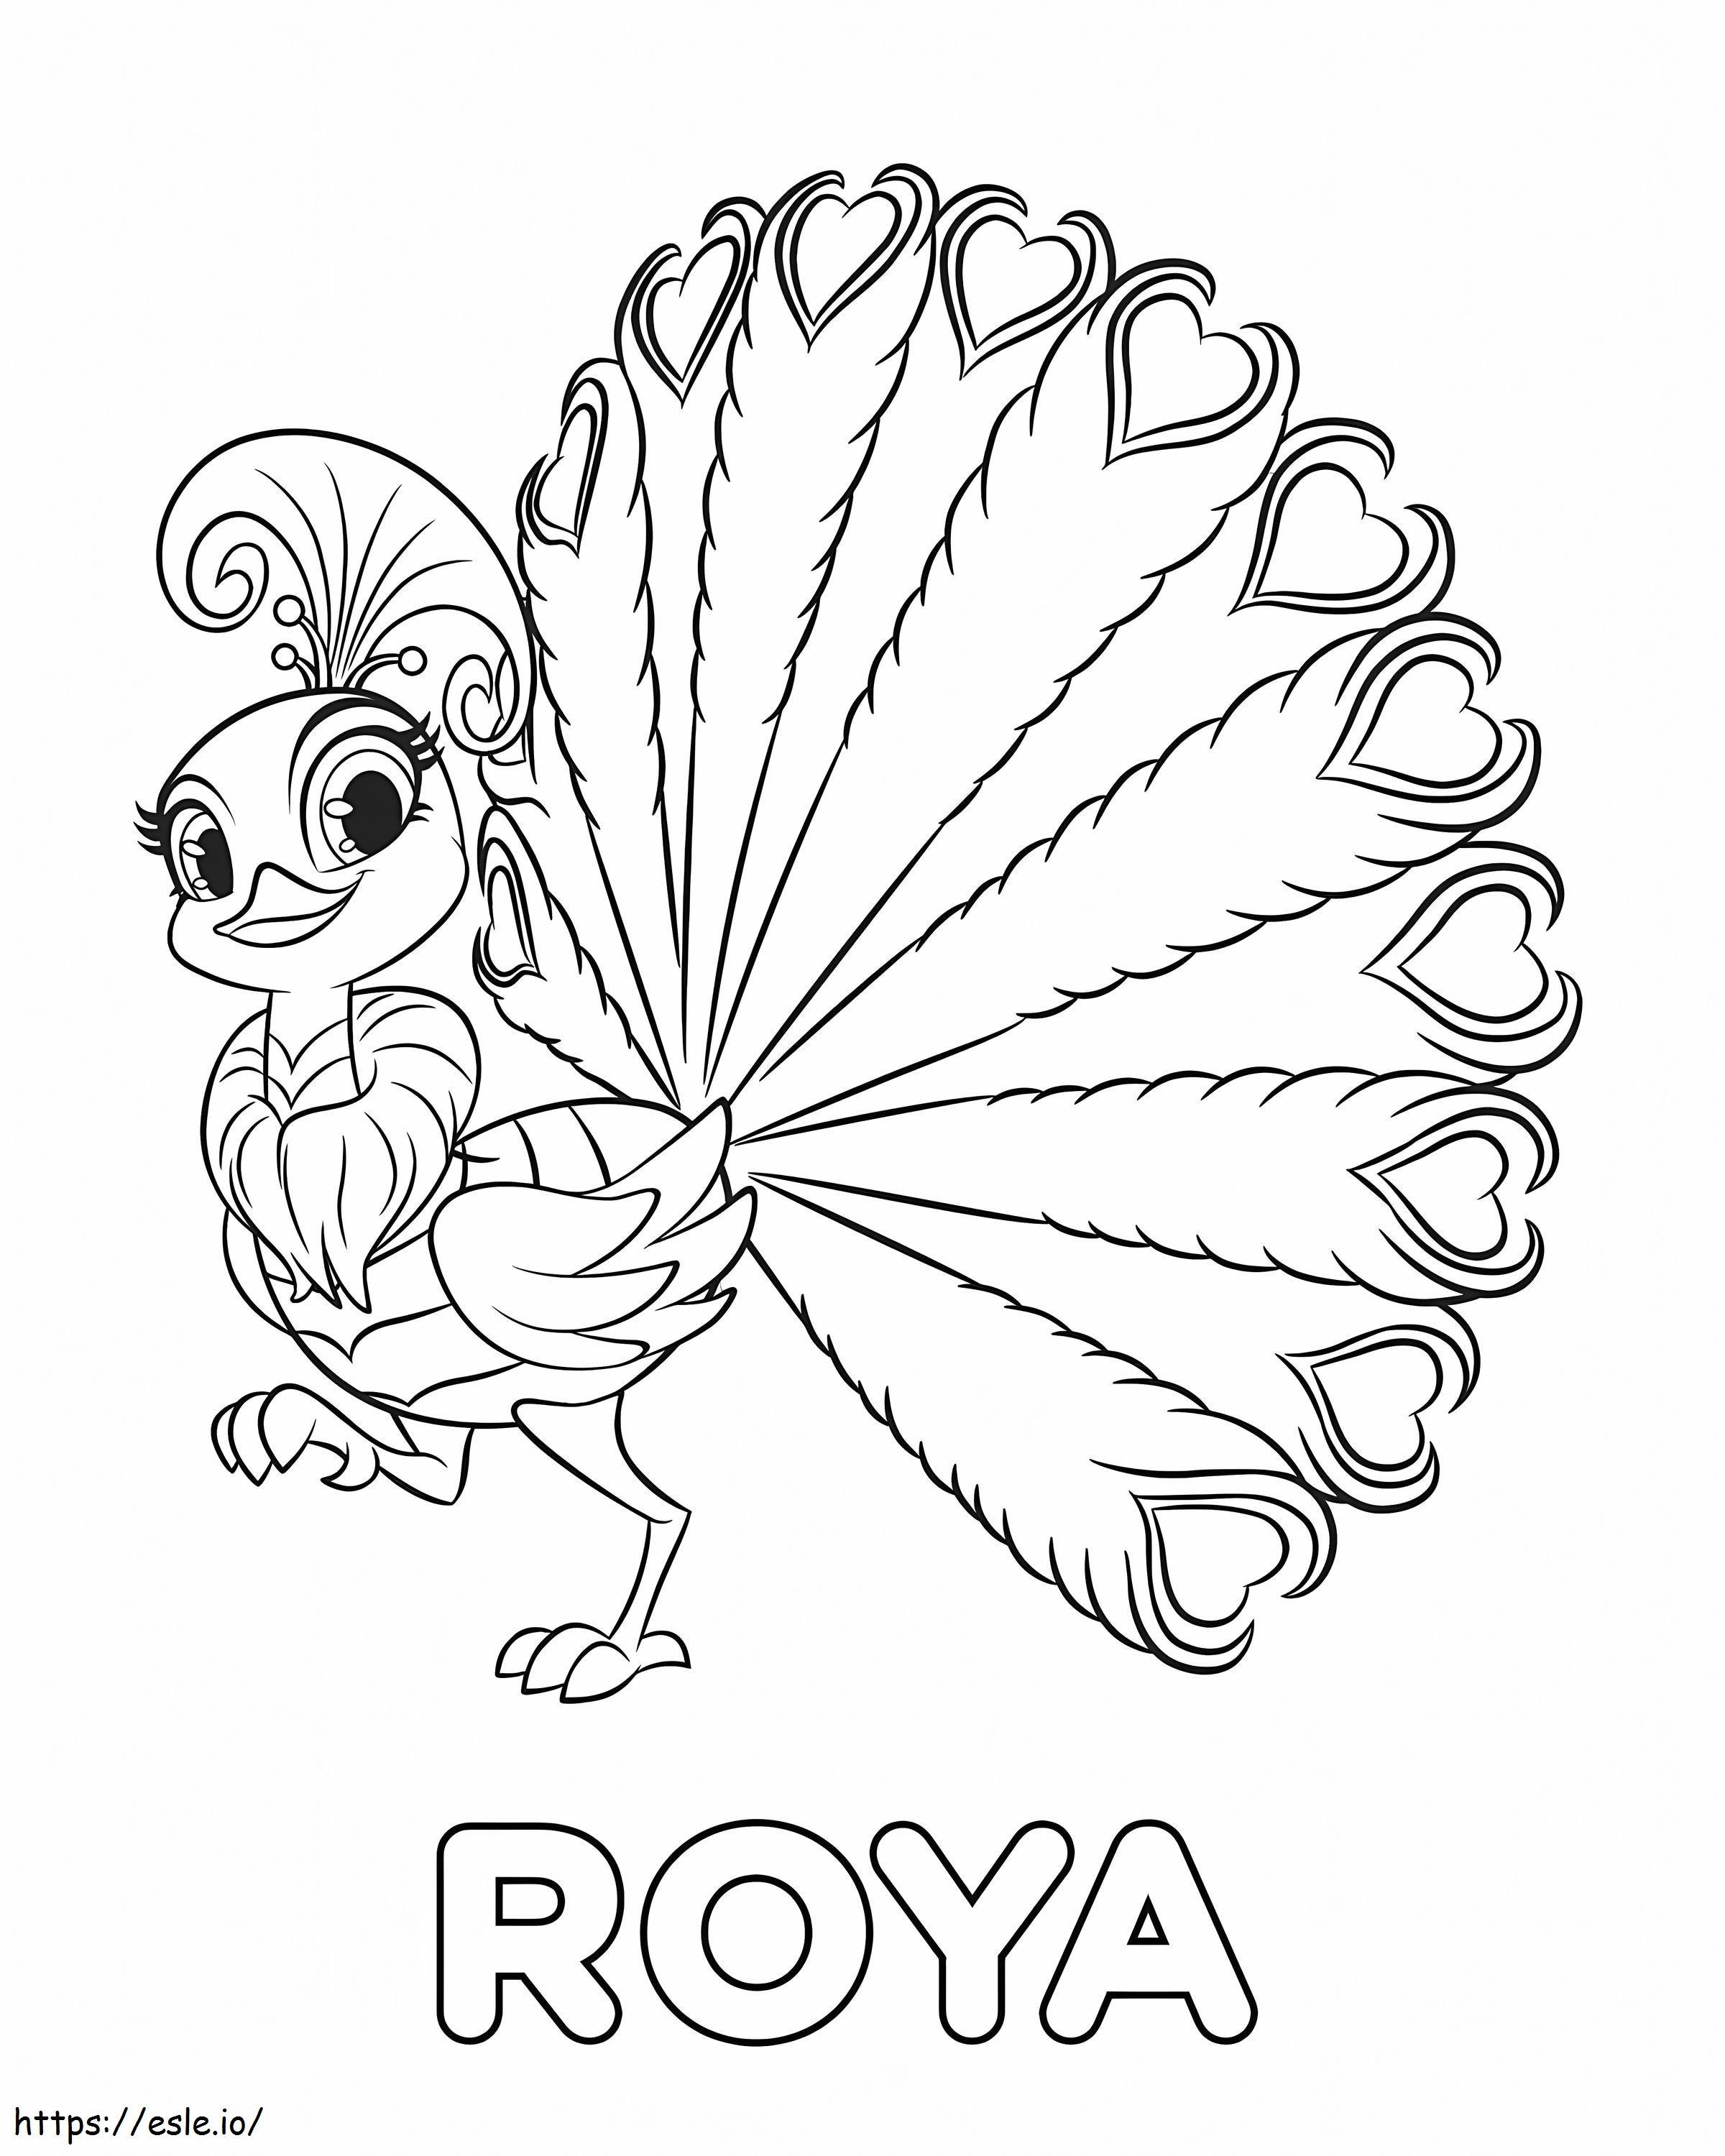 1571446053 Roya Shimmer And Shine coloring page